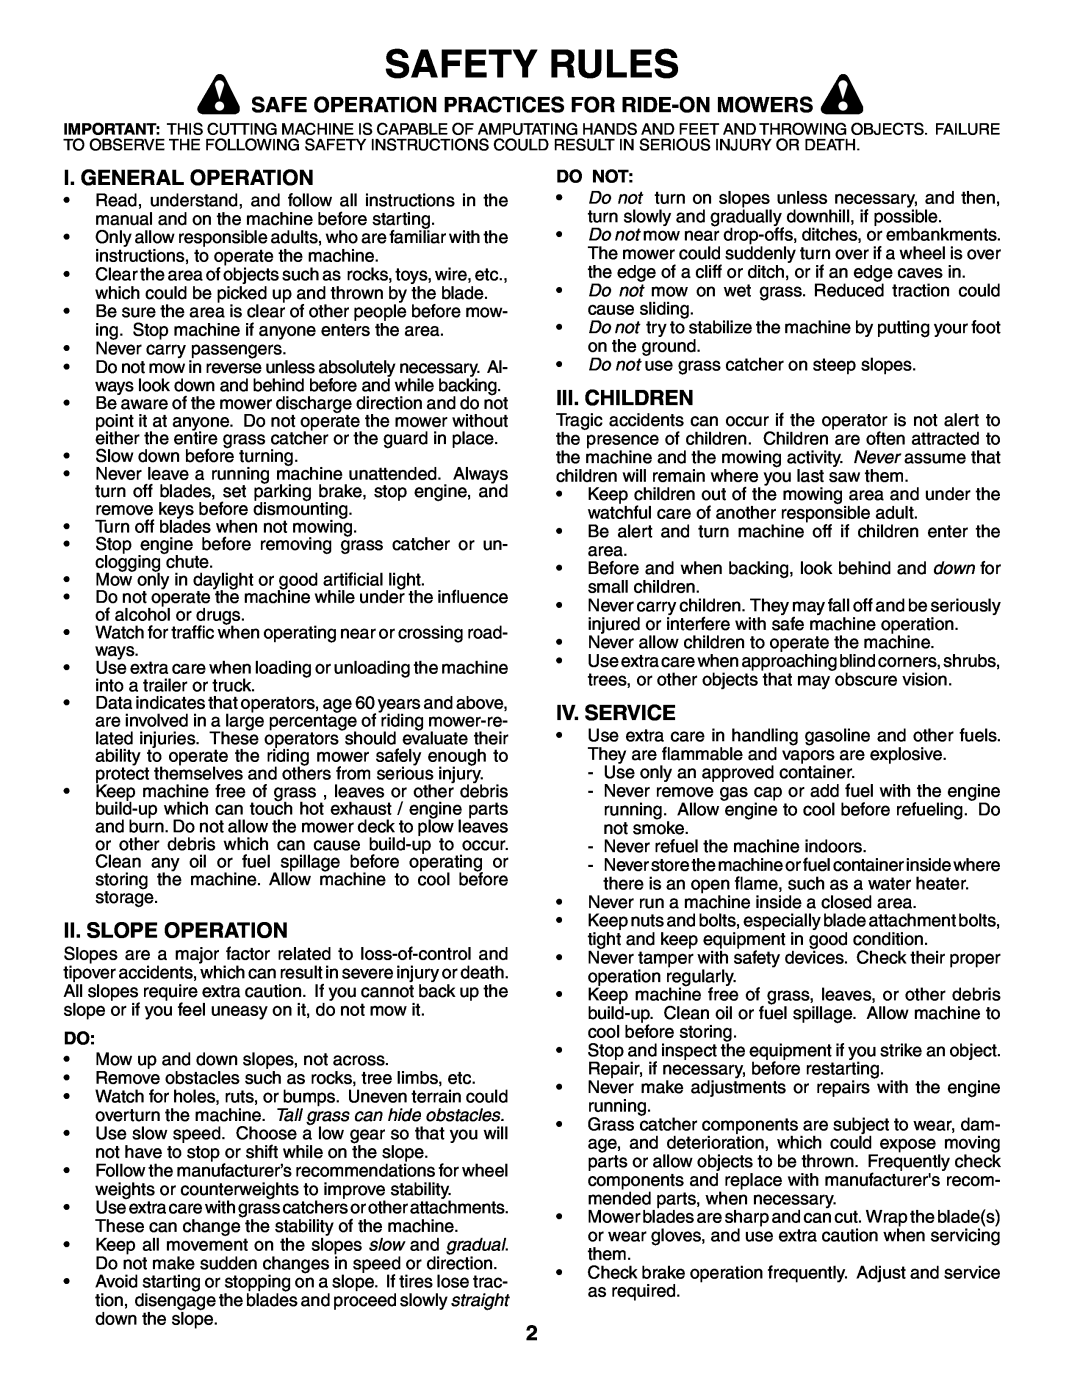 Poulan PO175H42STB Safety Rules, Safe Operation Practices For Ride-On Mowers, I. General Operation, Ii. Slope Operation 